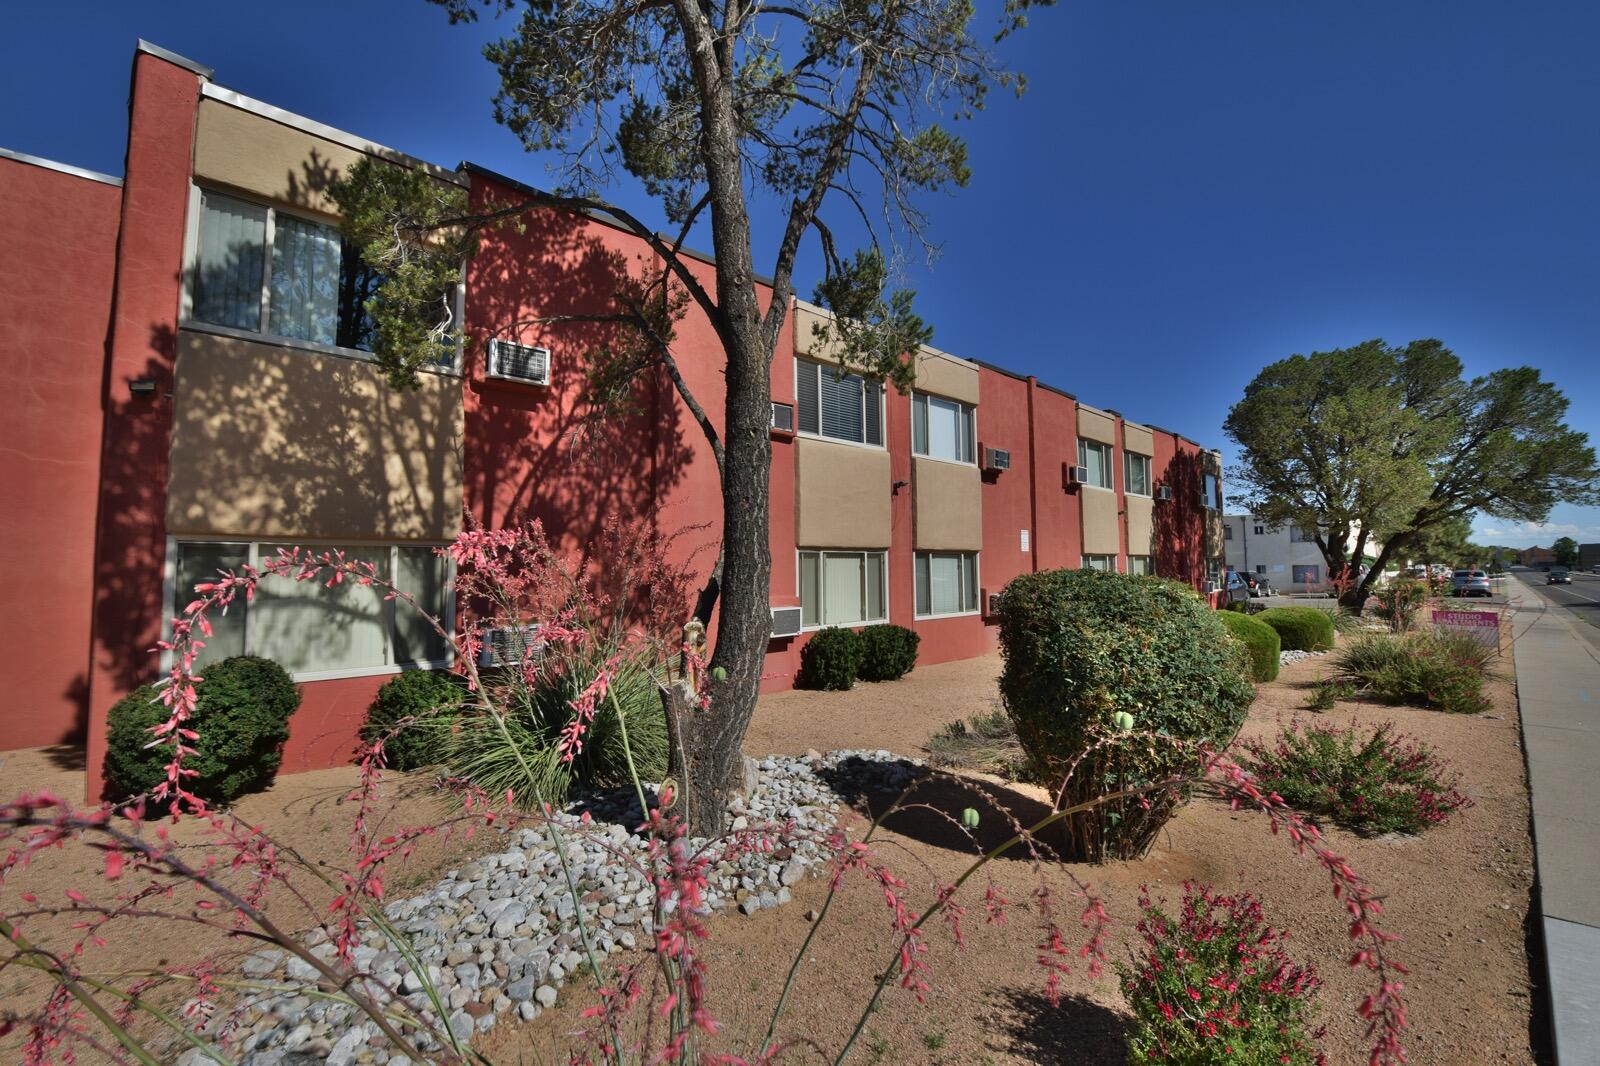 This all studio 39 unit portfolio, has 8 units under renovation that should be finished in September. Located at 1409 Girard NE and 1440 Vassar NE and just north of UNM north campus (medical/law school) and next to the world famous Padilla's restaurant (arrive early!).Amenities include high speed internet, two laundry rooms and 3 furnished corporate style units. In addition to the 8 units under renovation, the owner has installed new boilers in 2015 and a new roof in 2018.The location is great if you need quick access to UNM, CNM, the Downtown Medical cluster, or Uptown's three main retail centers.This is a core asset with stabilized cash flows that could also be a value-add opportunity if an investment was made in upgraded finishes for the balance of the units.